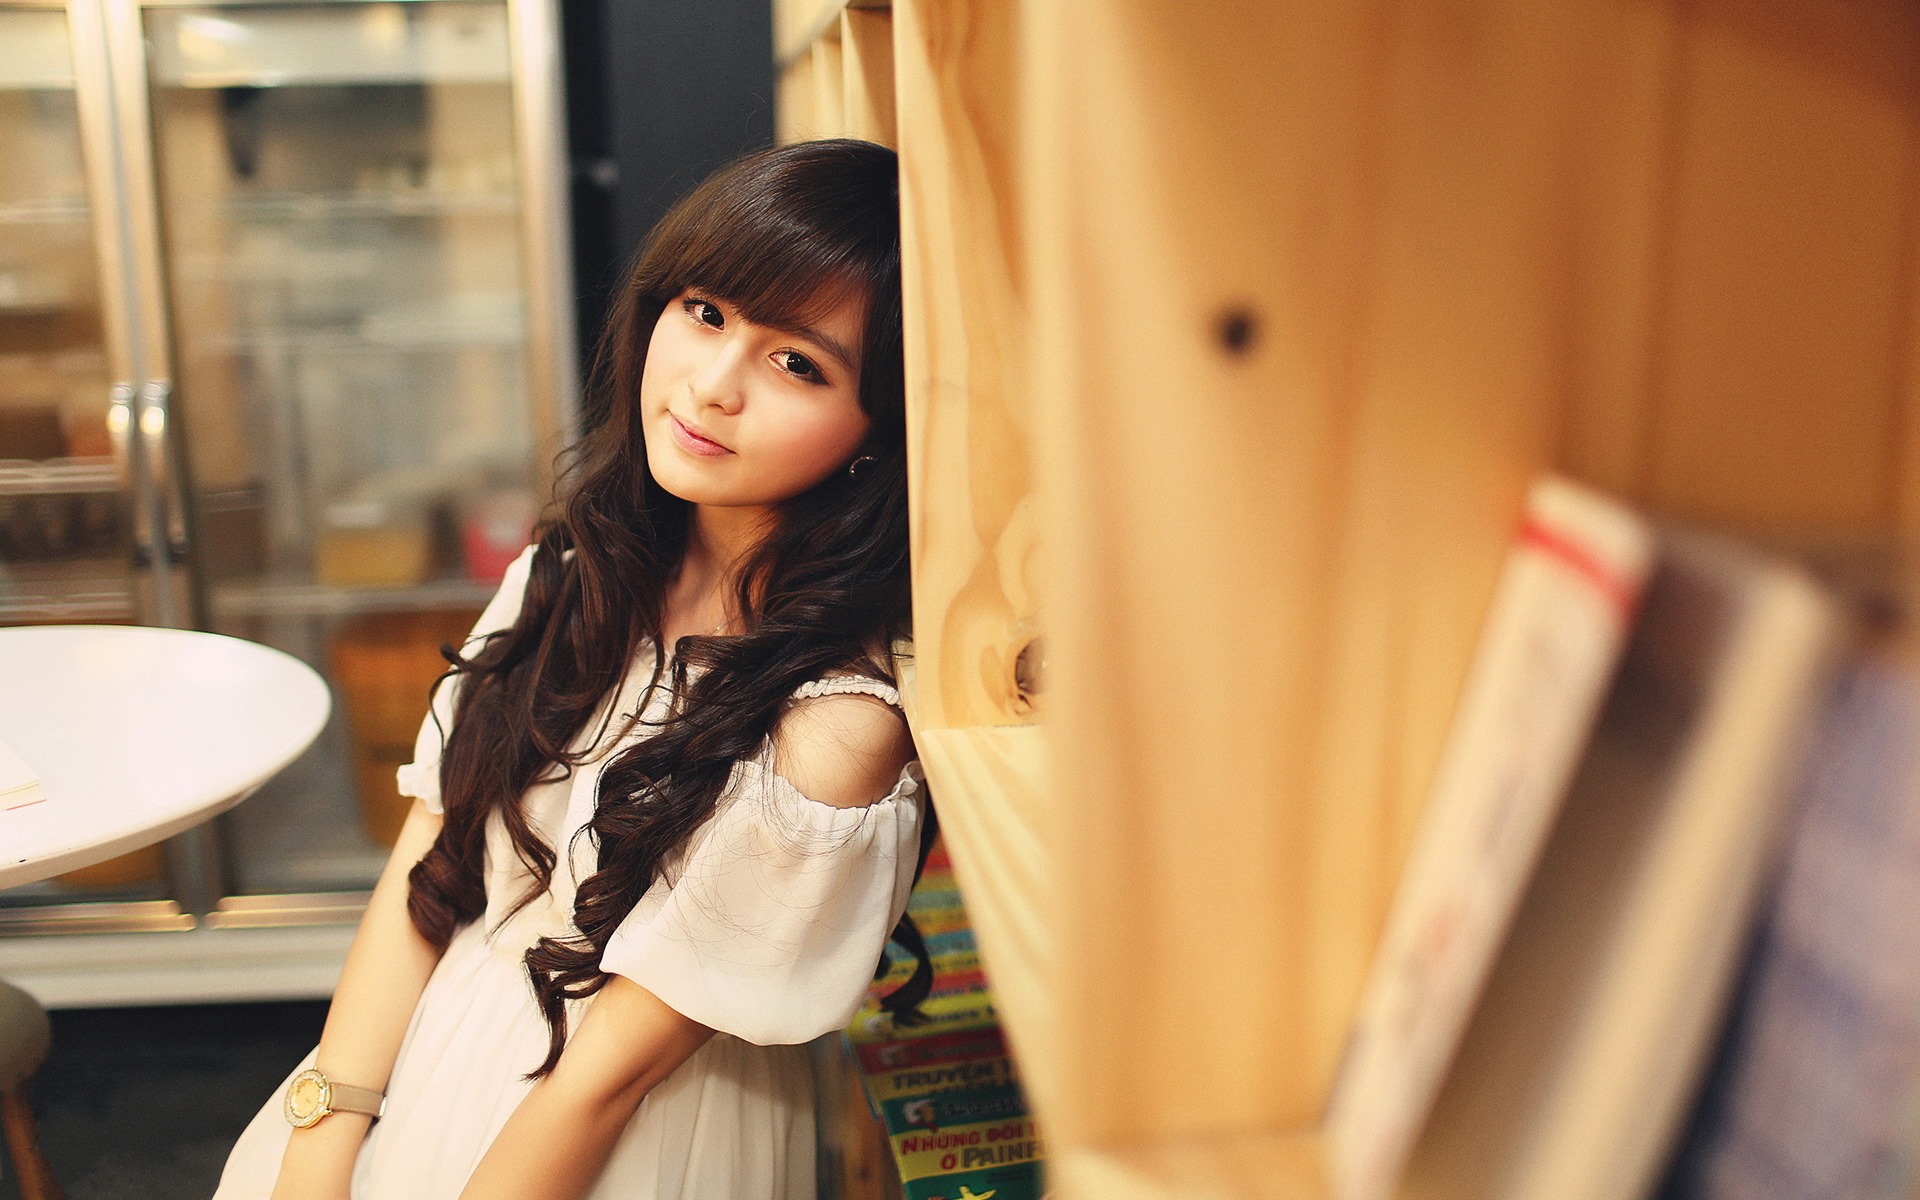 Pure and lovely young Asian girl HD wallpapers collection (3) #4 - 1920x1200